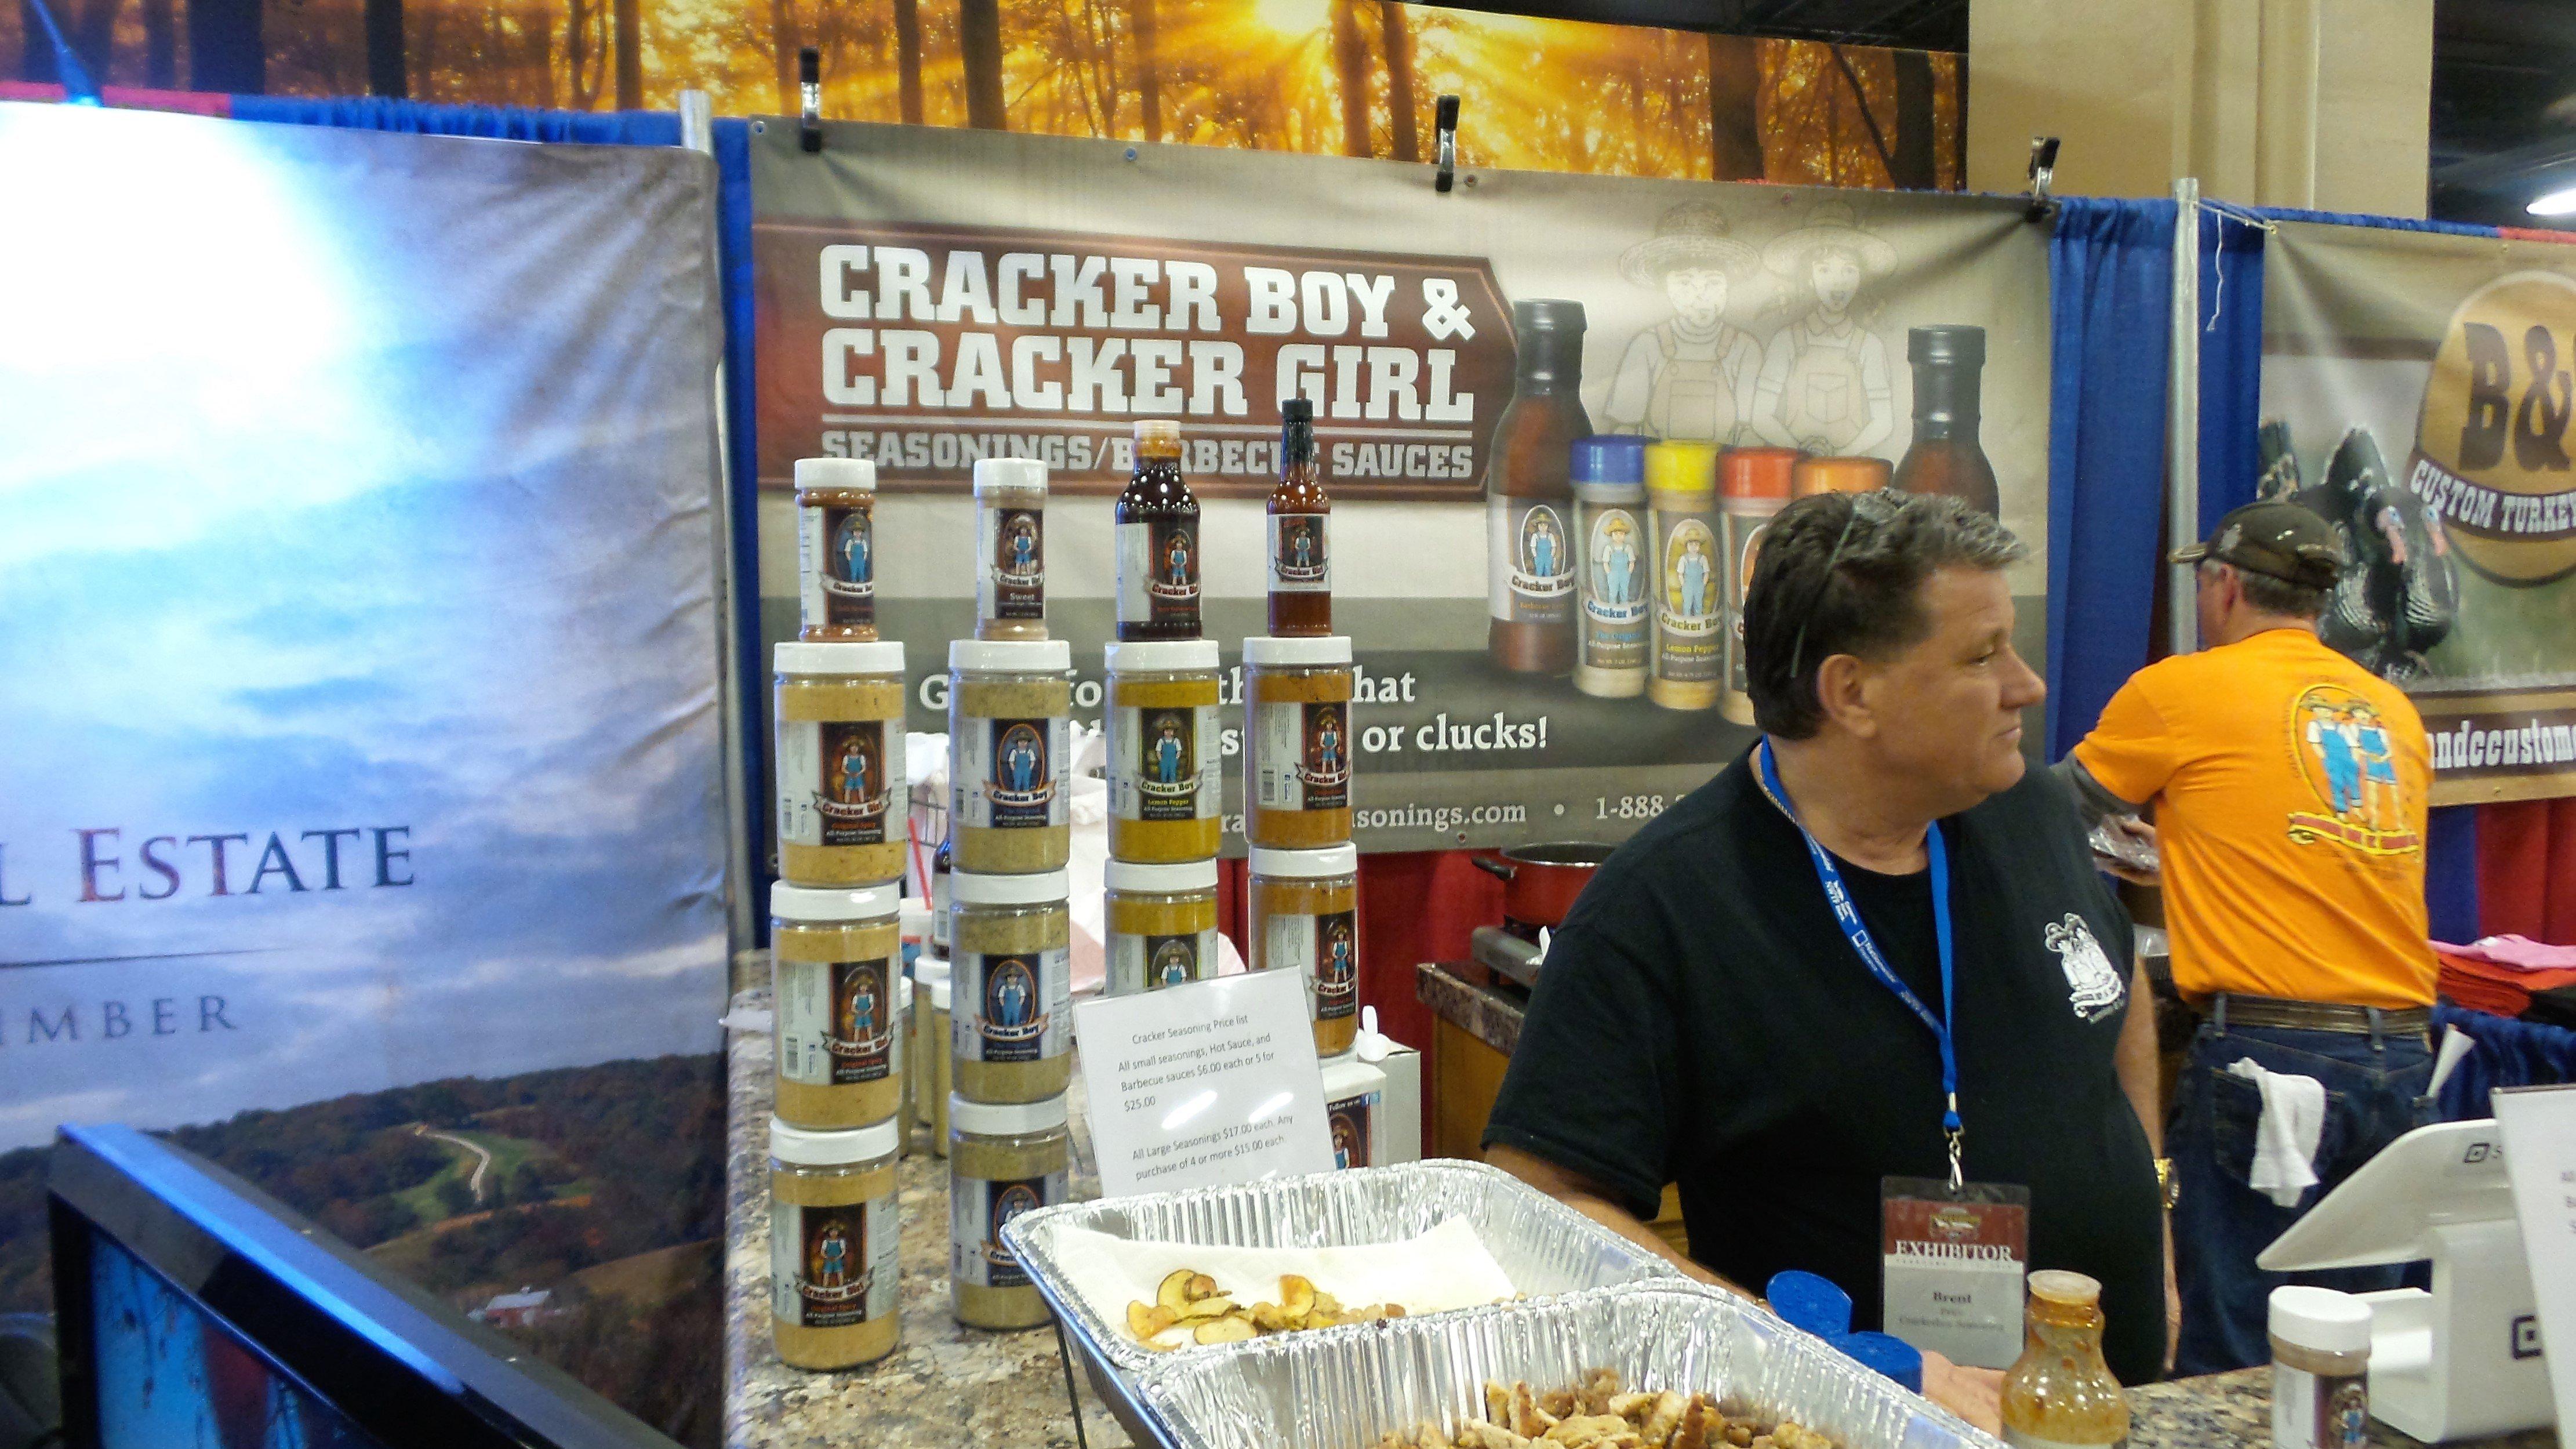 The folks at Cracker Seasonings introduced some new seasoning blends and sauces at the show.